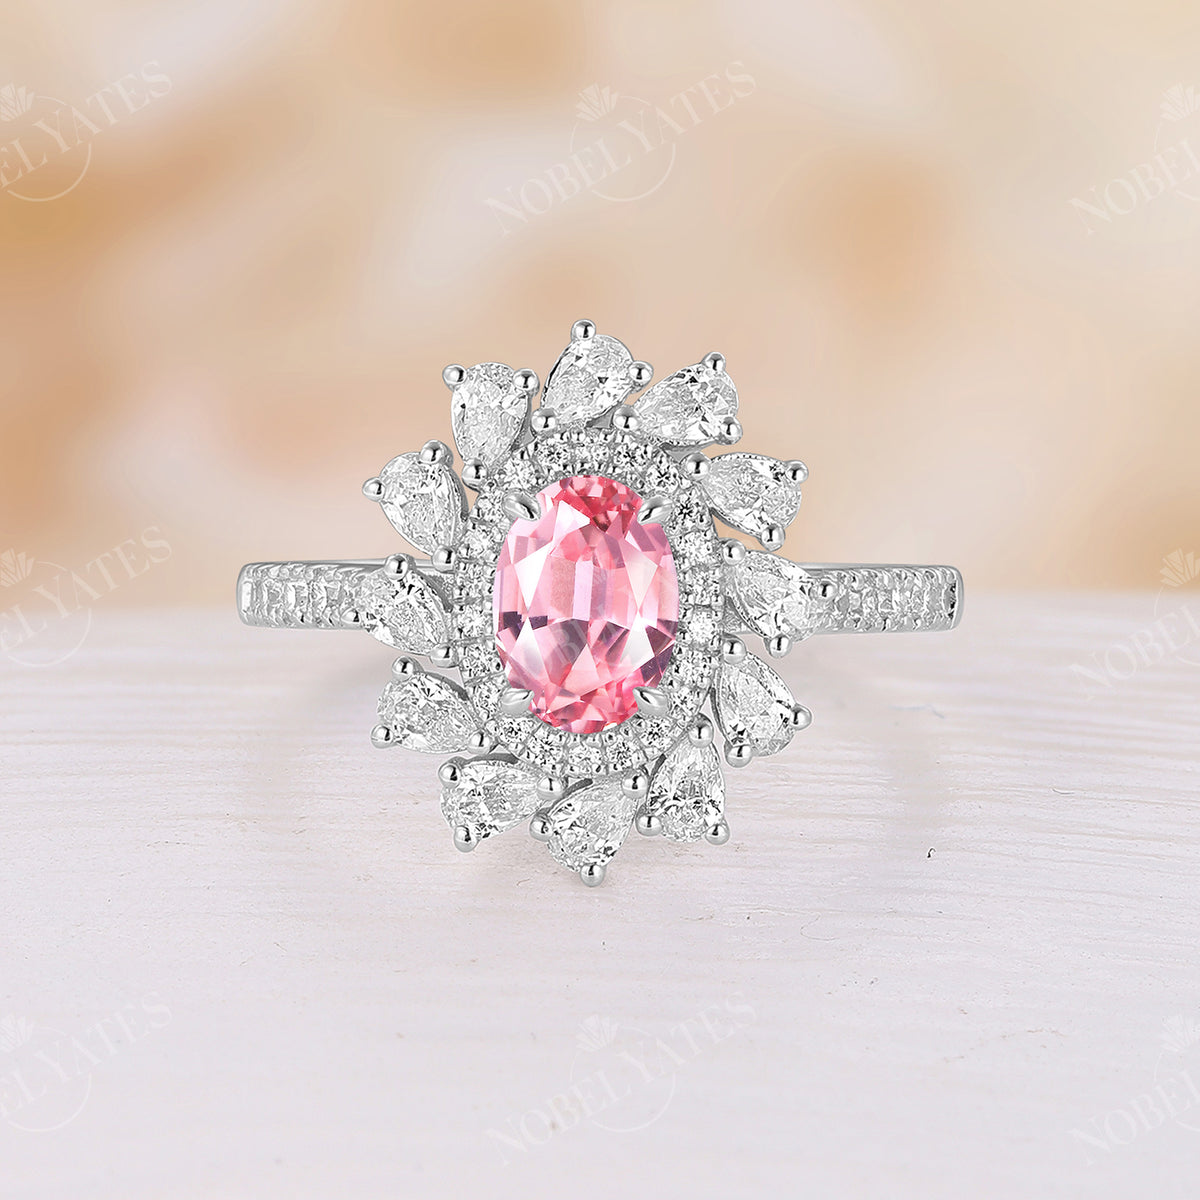 Pink Padparadscha Oval Cut Moissanite Double Halo Engagement Ring